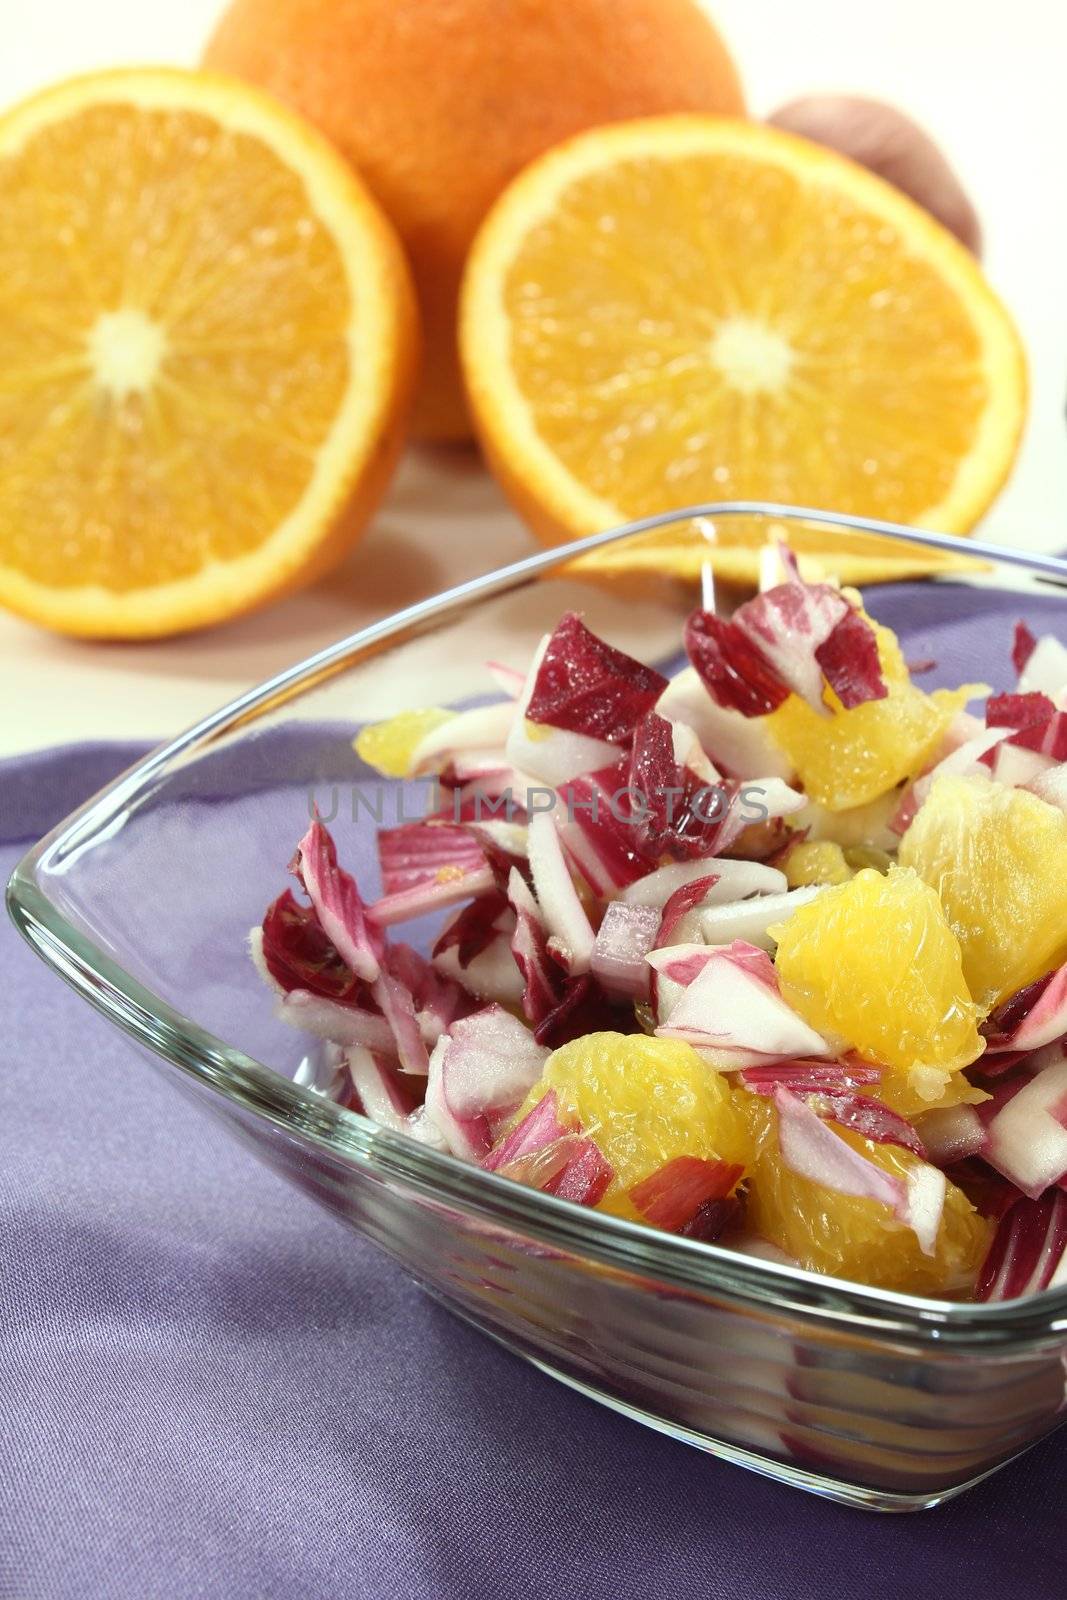 red chicory salad with fresh orange slices and dressing on a purple napkin